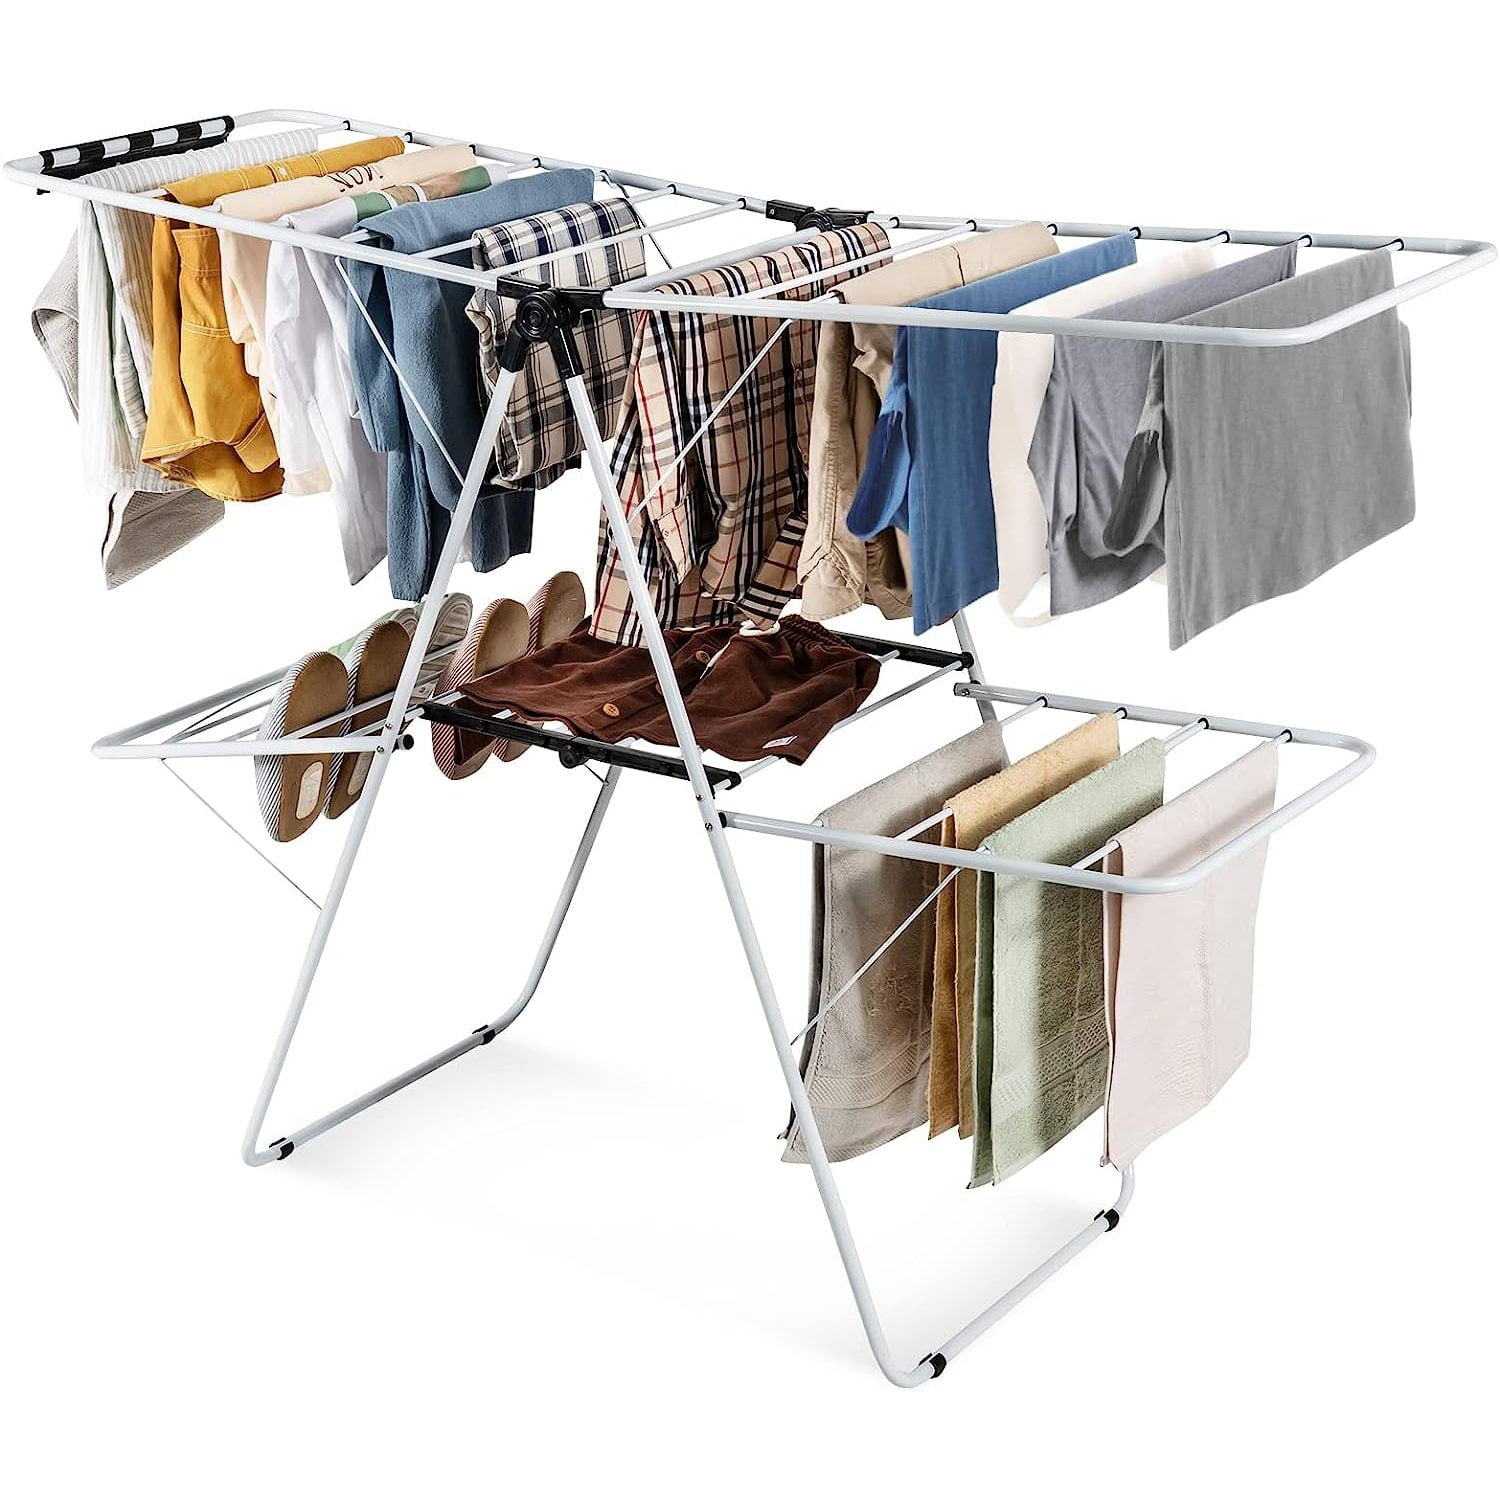 Wraparound Hockey Dry Stick Portable Equipment Drying Rack - Attaches to Hockey Sticks | Multipurpose Clothing Bags Sports Gear Drying System